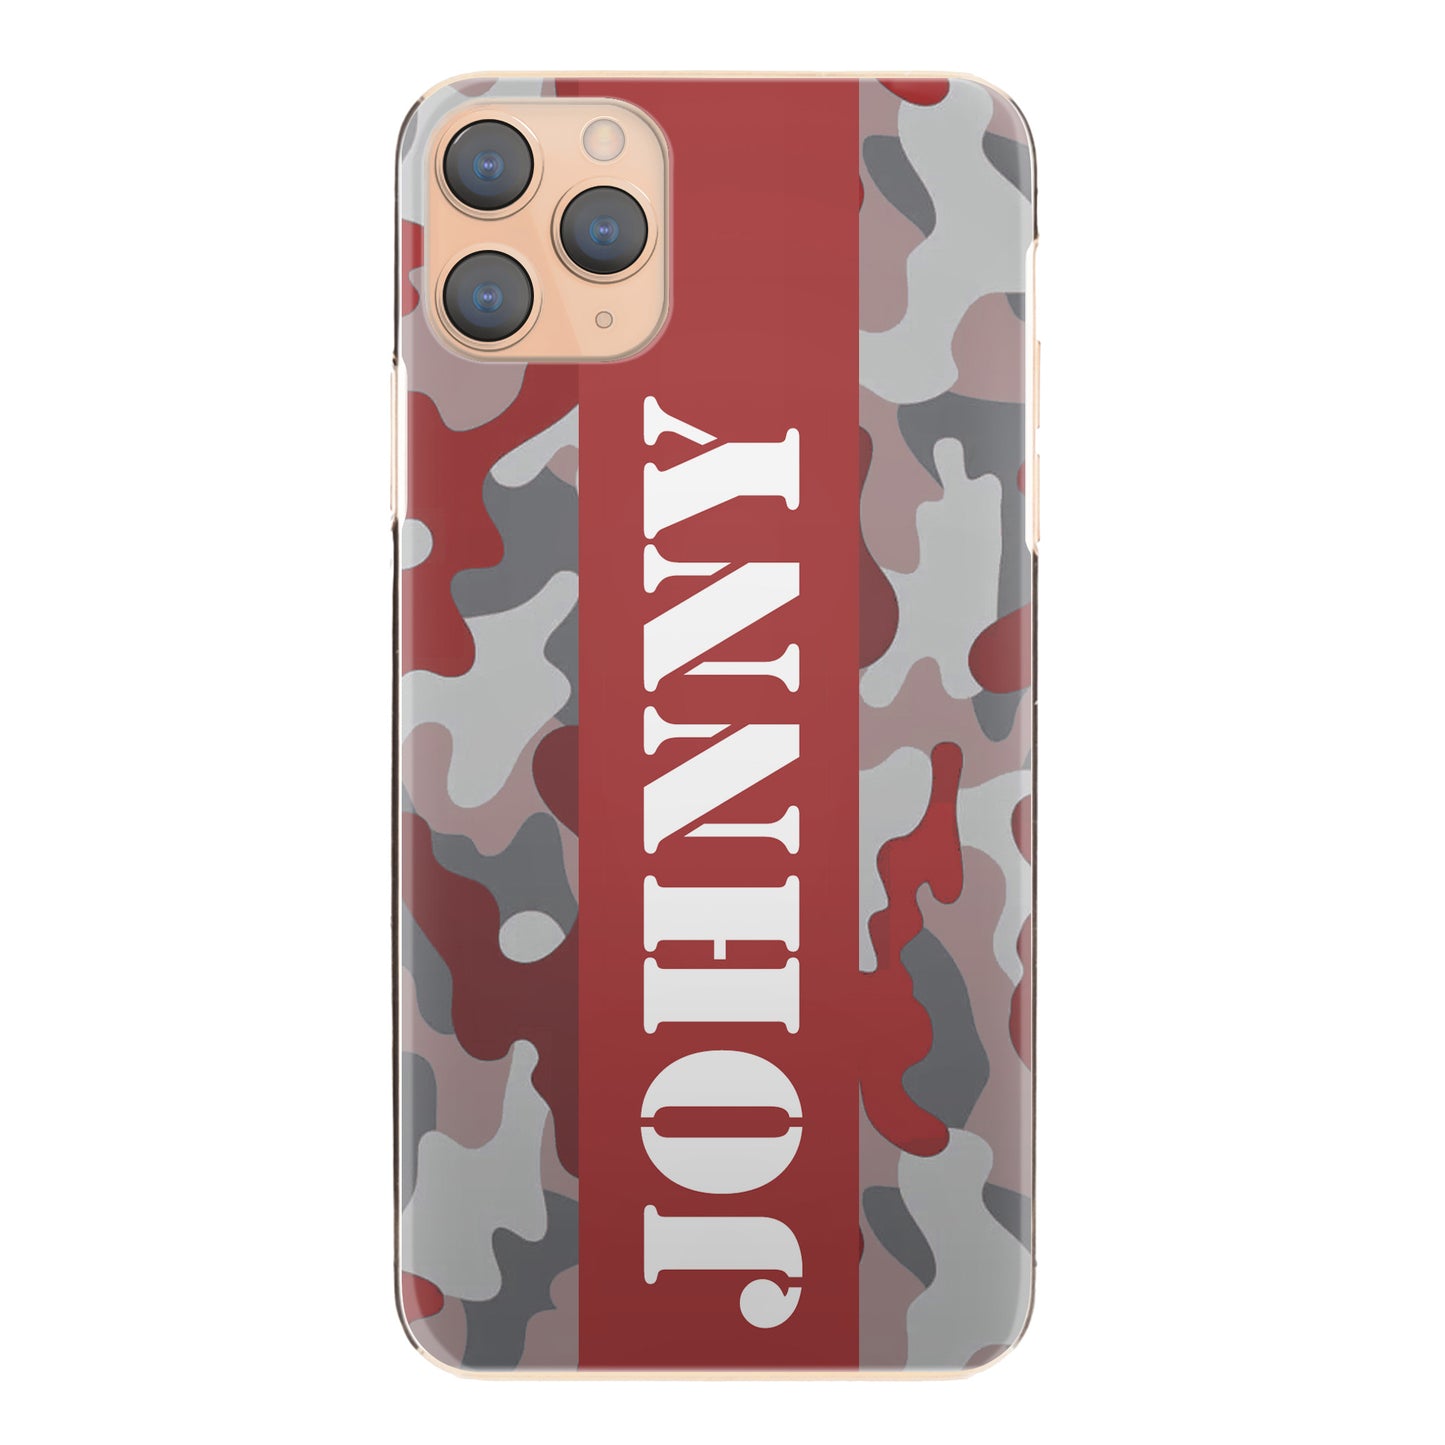 Personalised Honor Phone Hard Case with Military Text on Red Camo